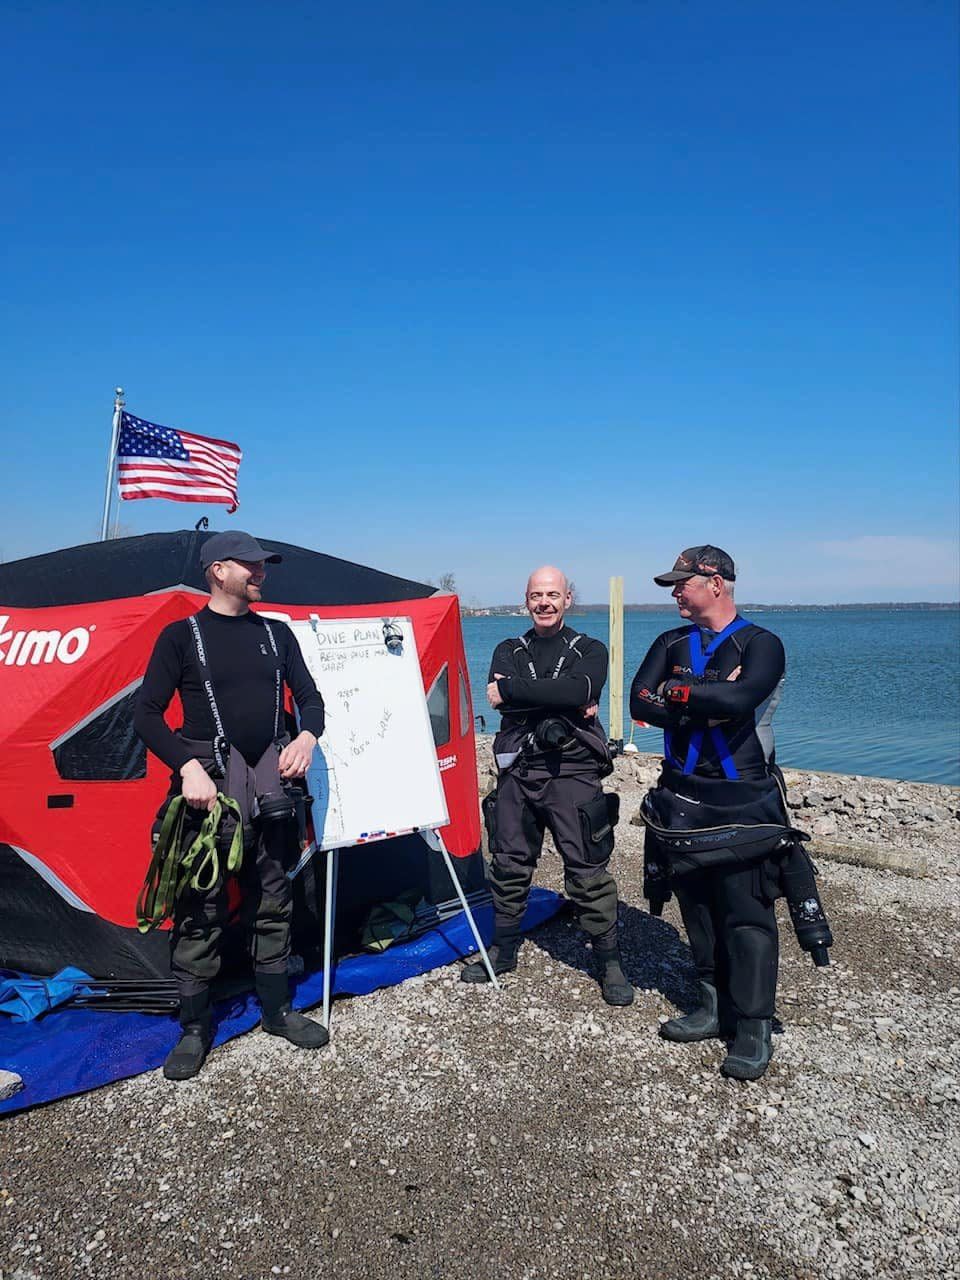 The volunteer dive team who found the statue, from left: Josh George, Richard Martin, and Jimmy Dawson.